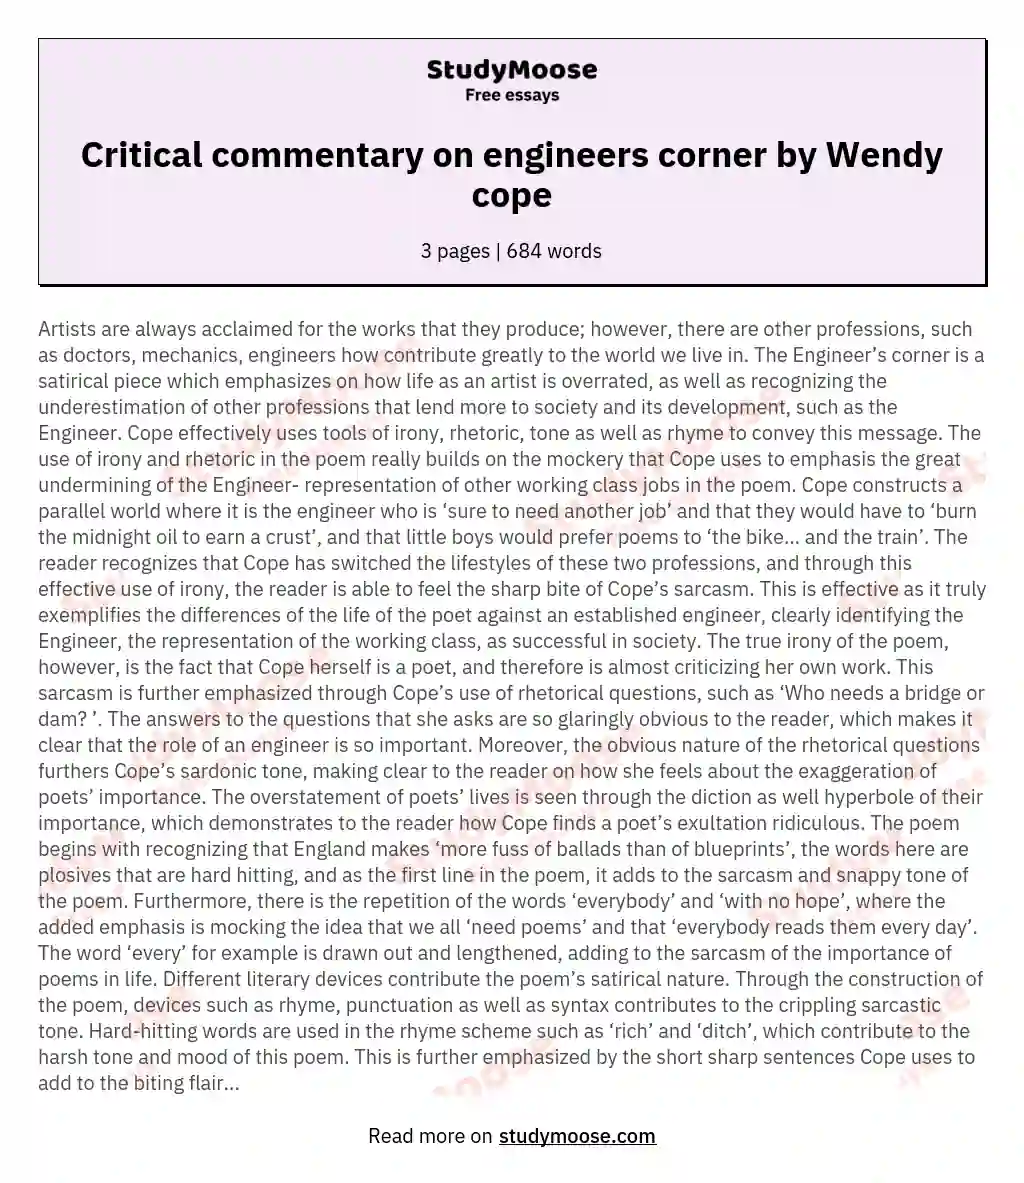 Critical commentary on engineers corner by Wendy cope